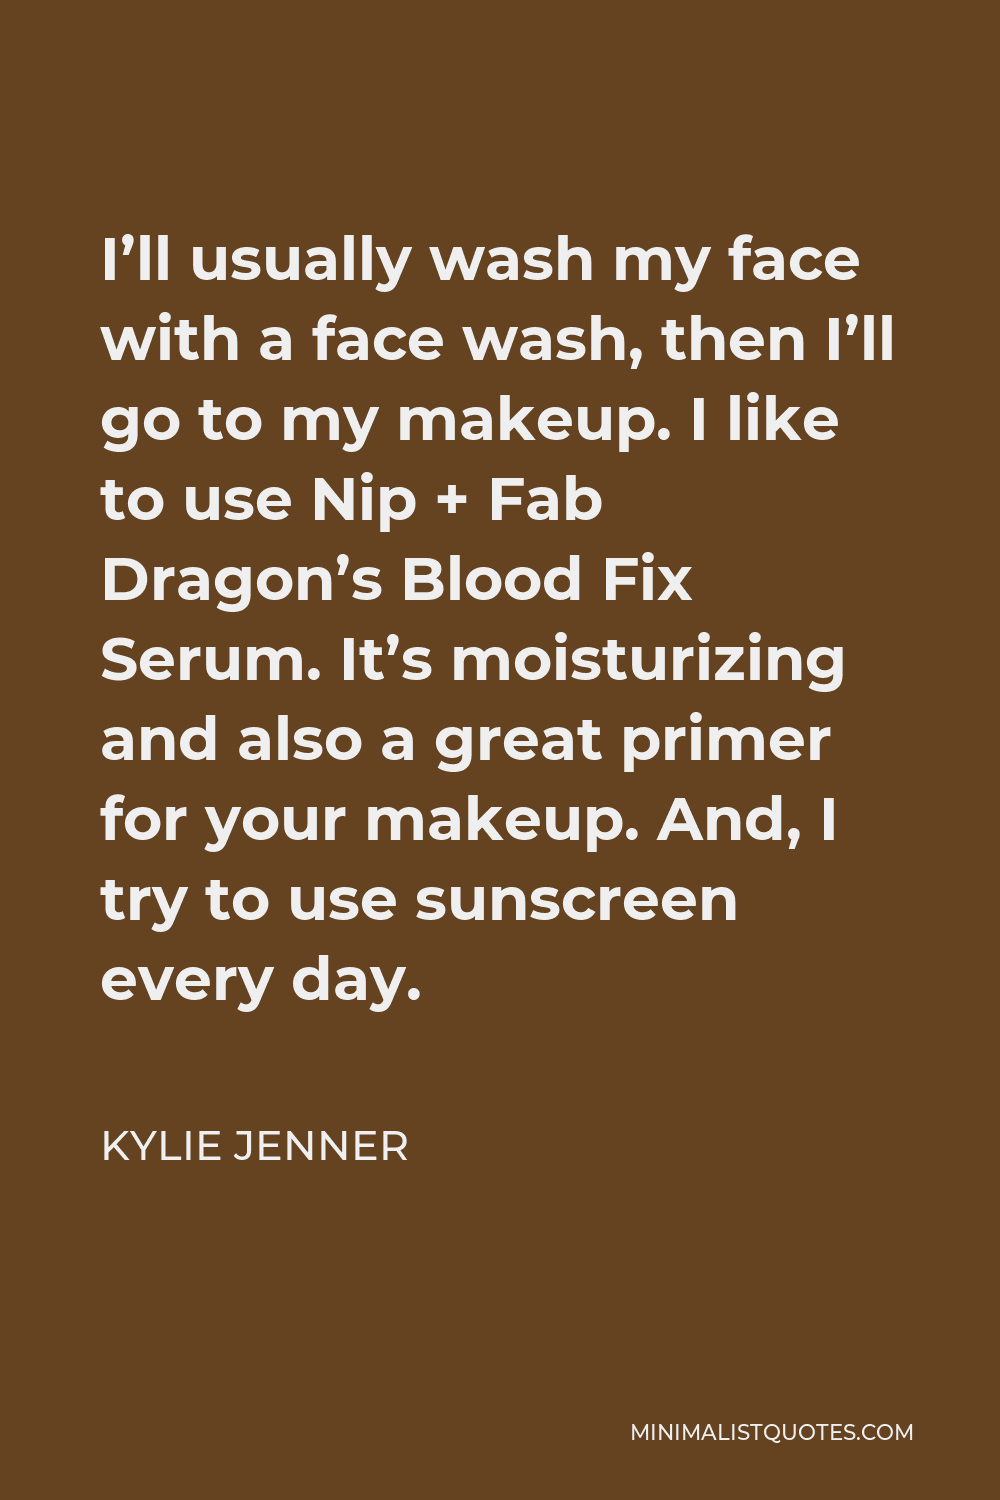 Kylie Jenner Quote - I’ll usually wash my face with a face wash, then I’ll go to my makeup. I like to use Nip + Fab Dragon’s Blood Fix Serum. It’s moisturizing and also a great primer for your makeup. And, I try to use sunscreen every day.